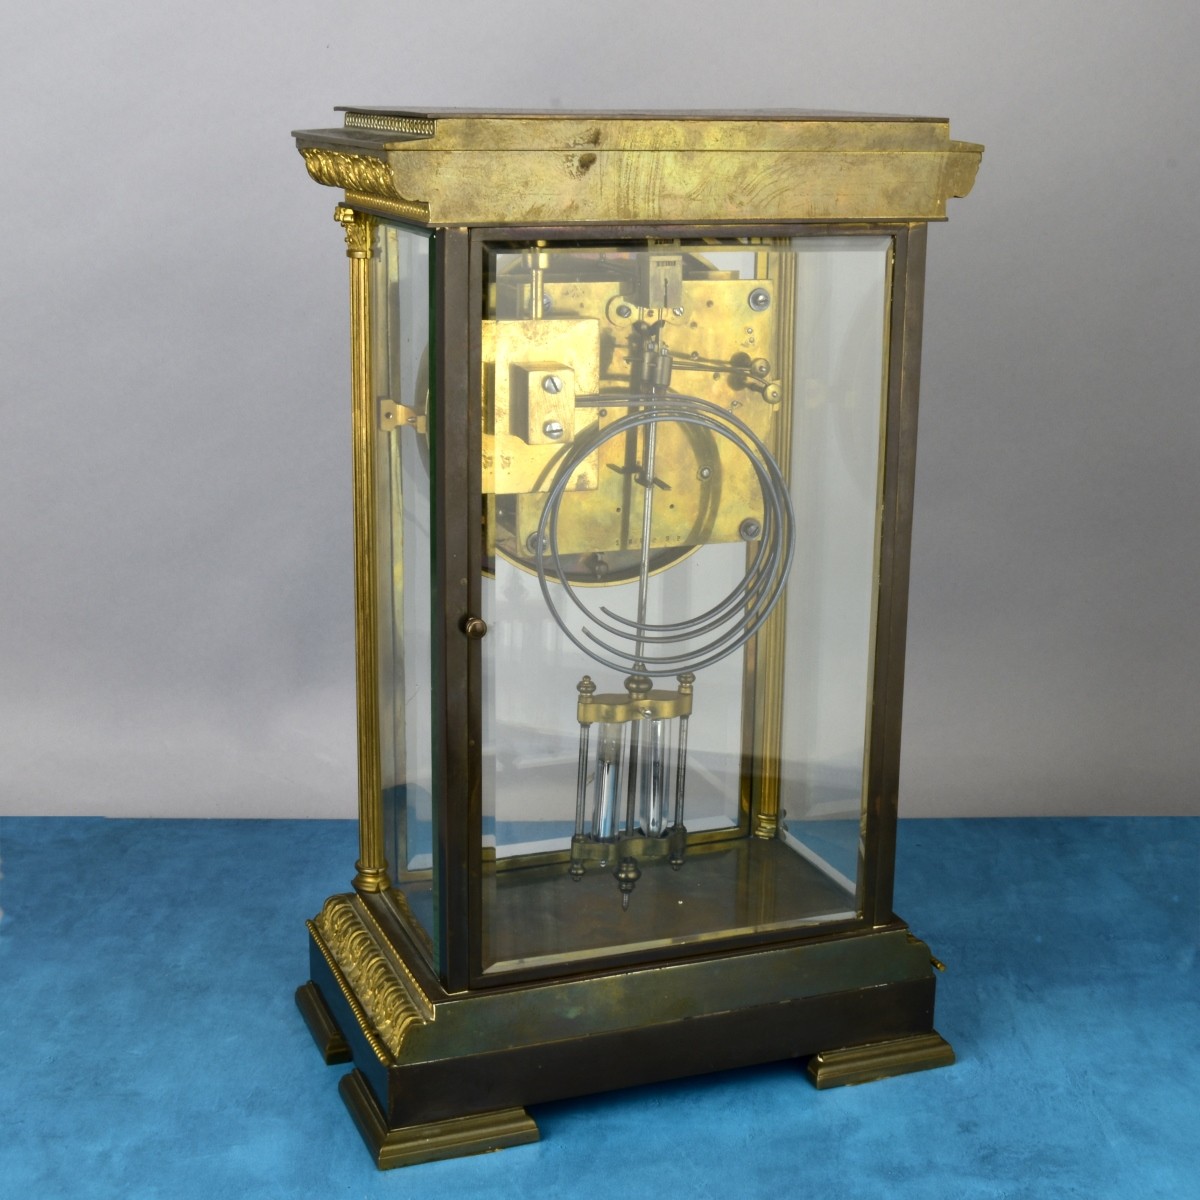 Antique French Bronze & Glass Mantle Clock